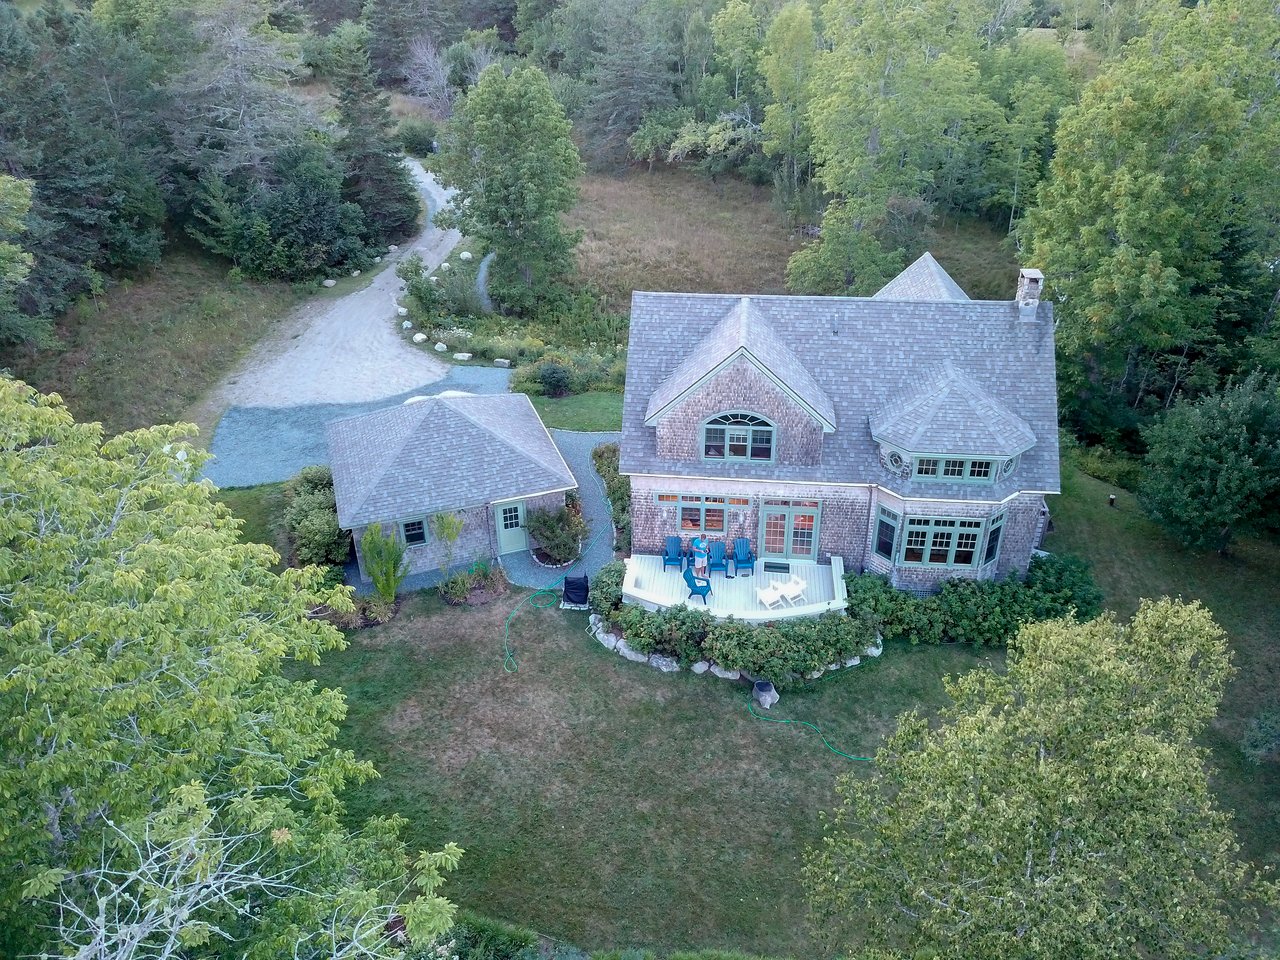 An aerial photo of the house we rented